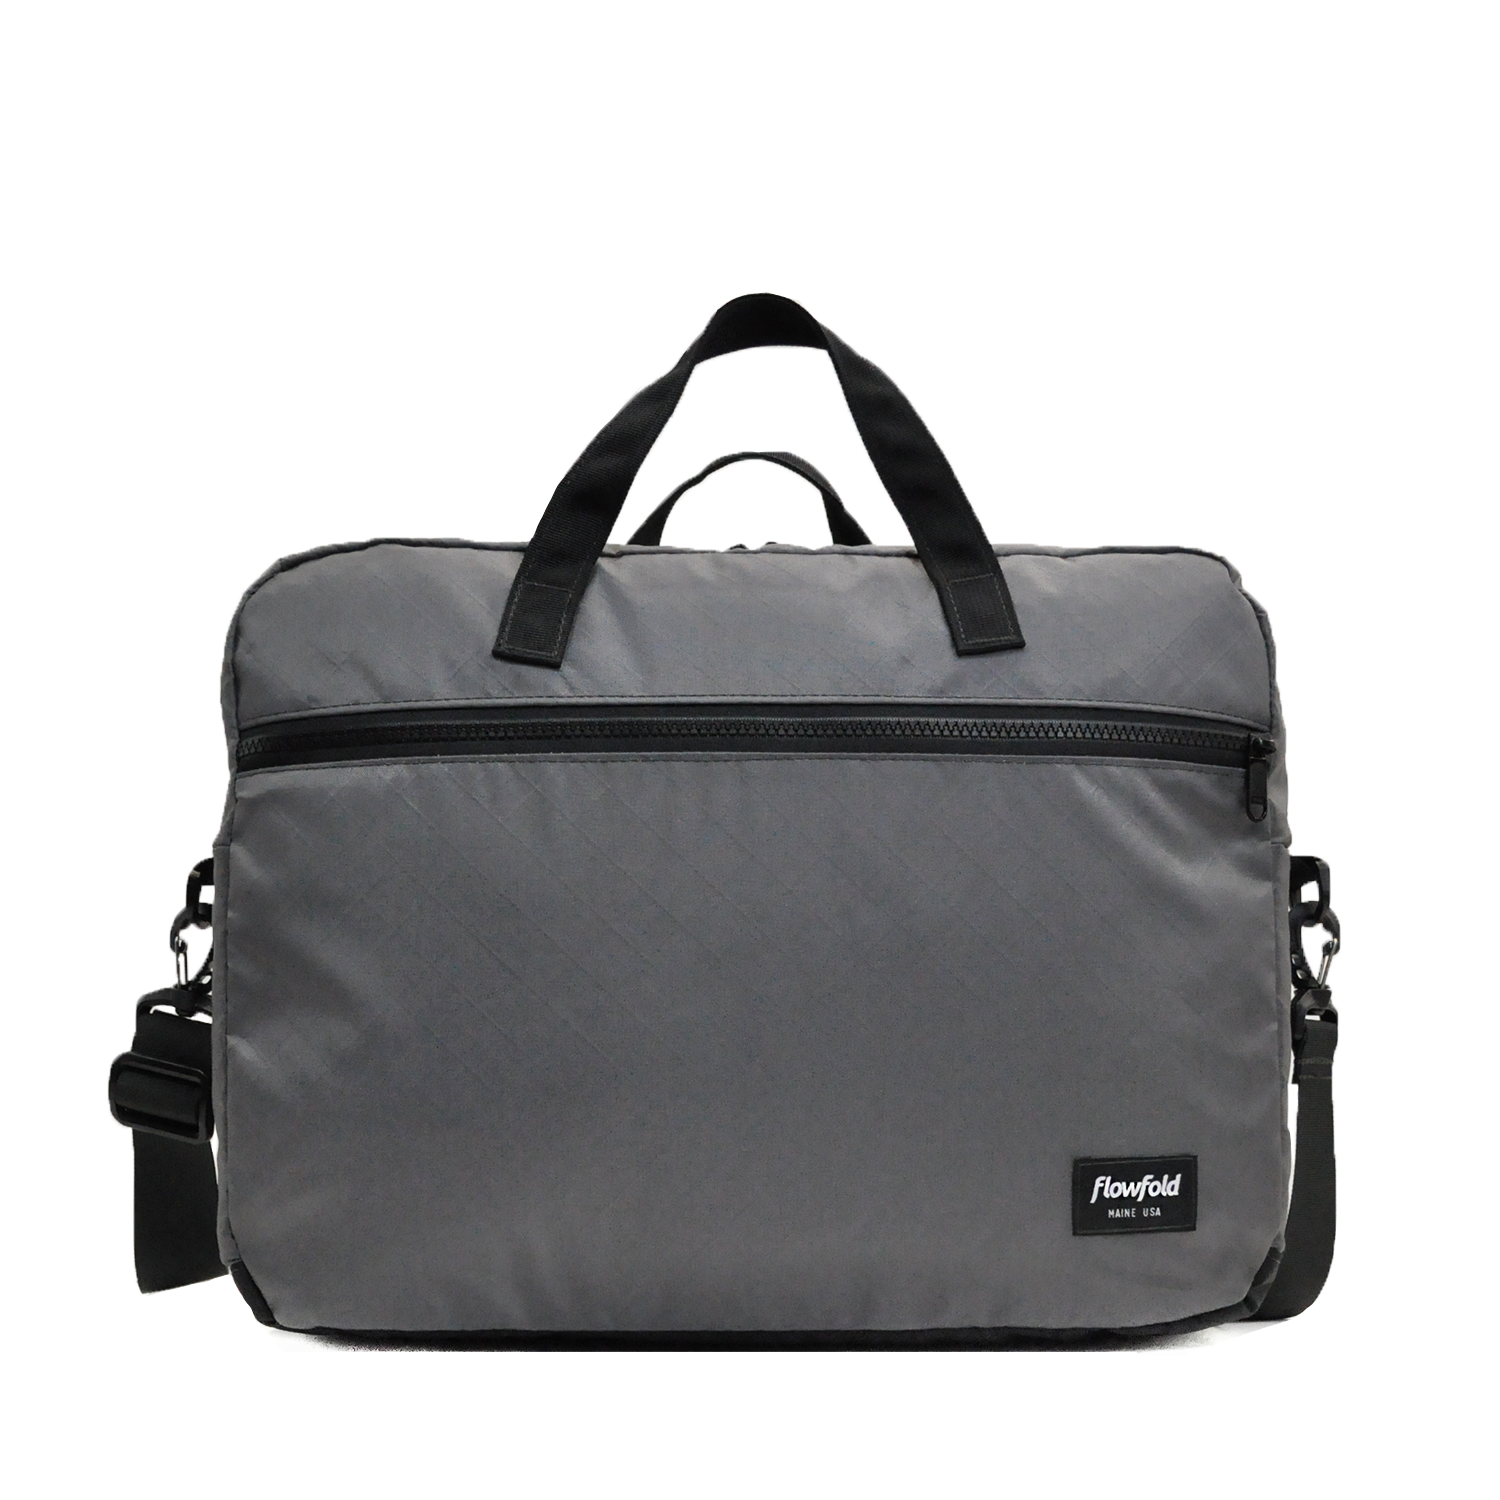 Flowfold Expedition Briefcase, Recycled Grey